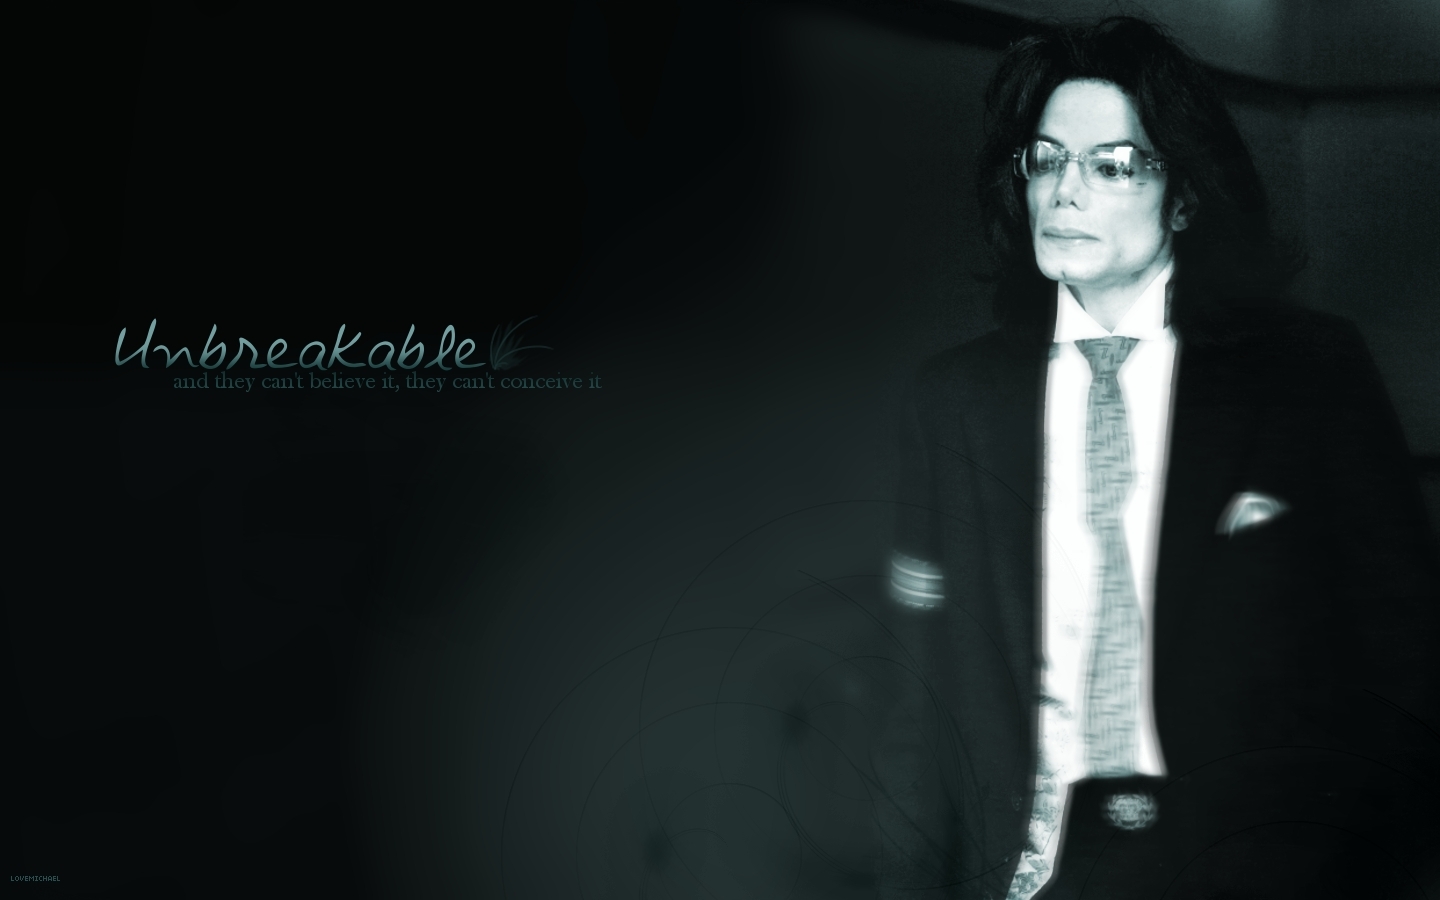 Michael Jackson The Legend   Wallpapers Free Download